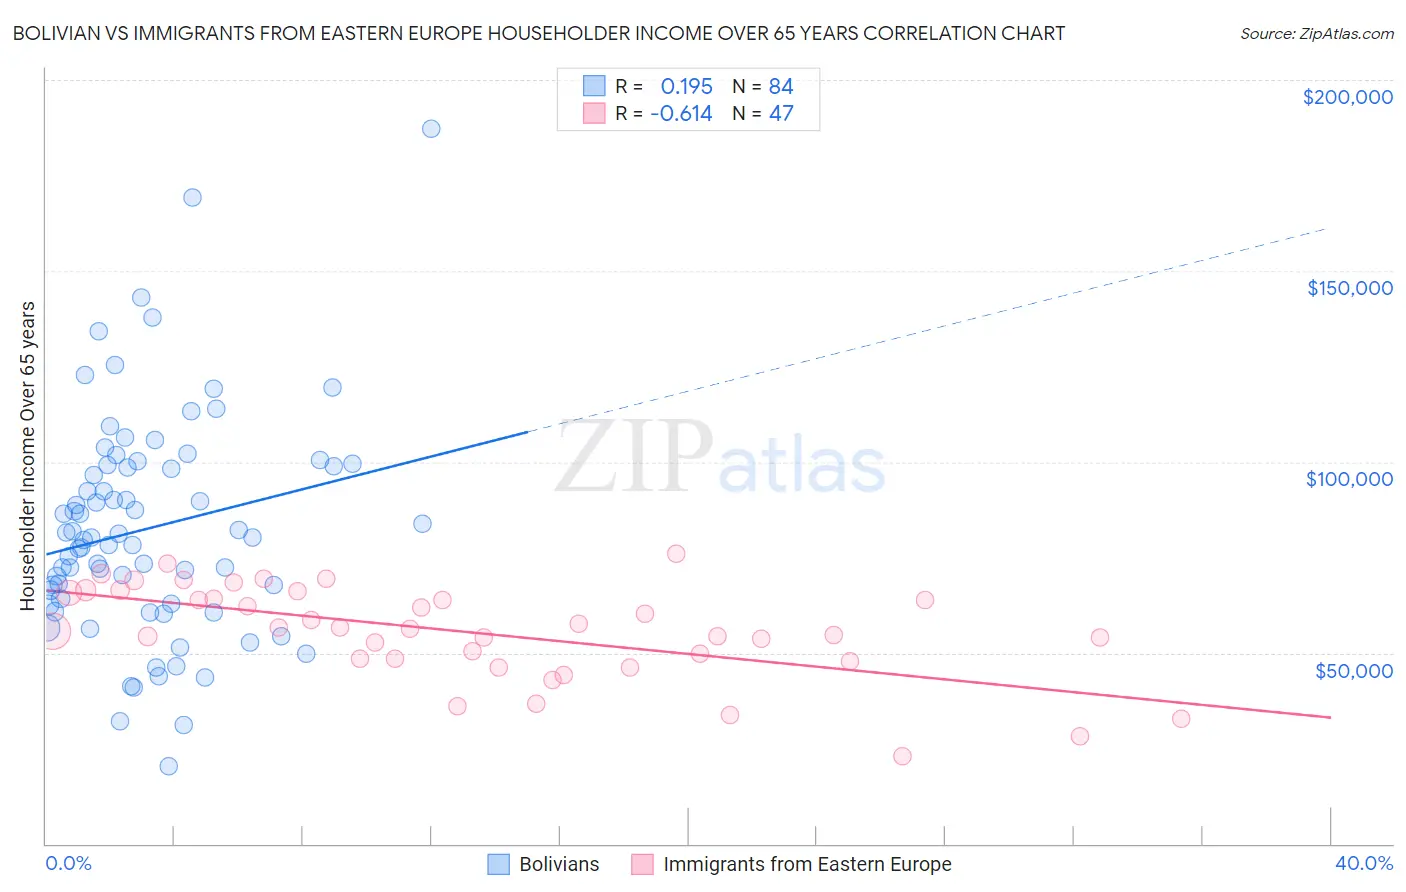 Bolivian vs Immigrants from Eastern Europe Householder Income Over 65 years